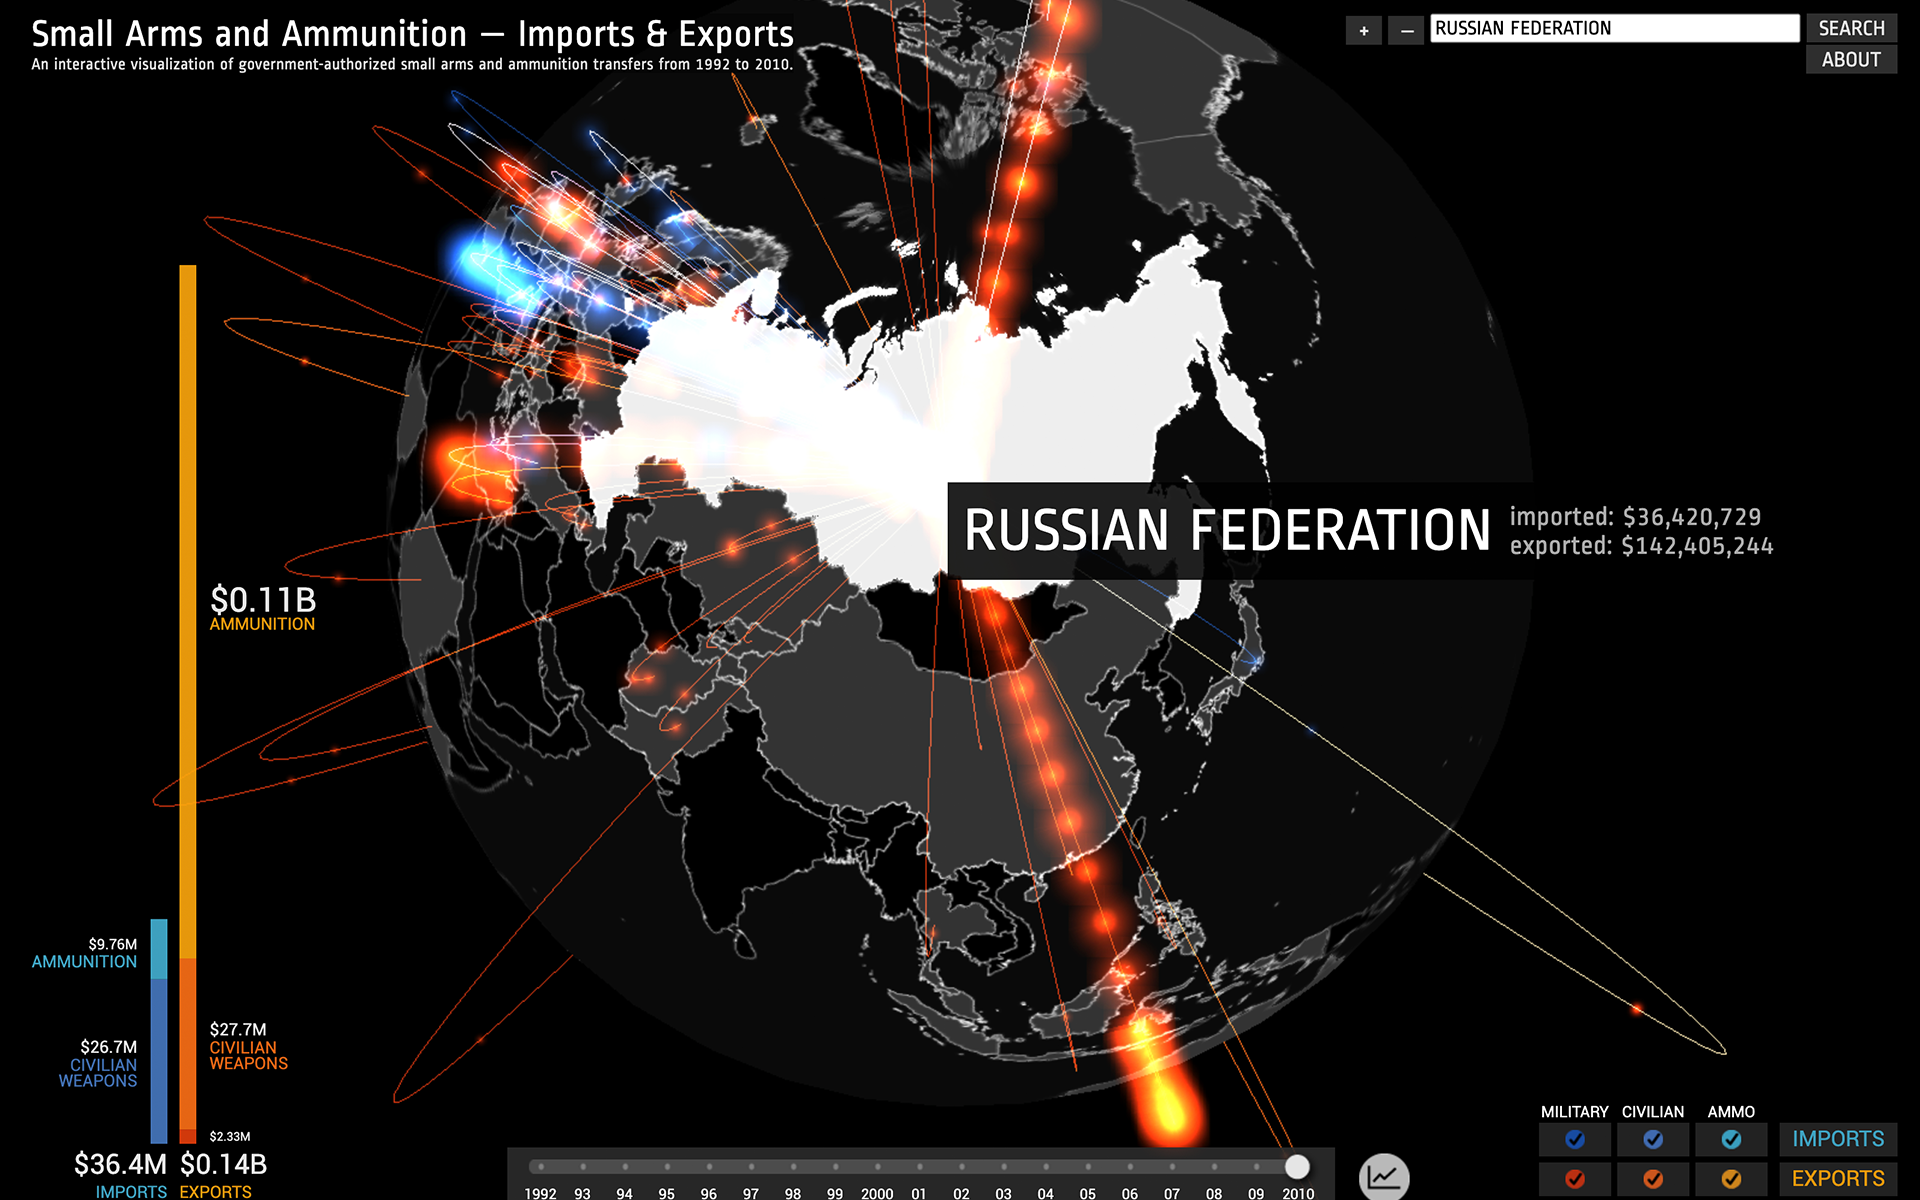 Global Arms Trade Visualization #3